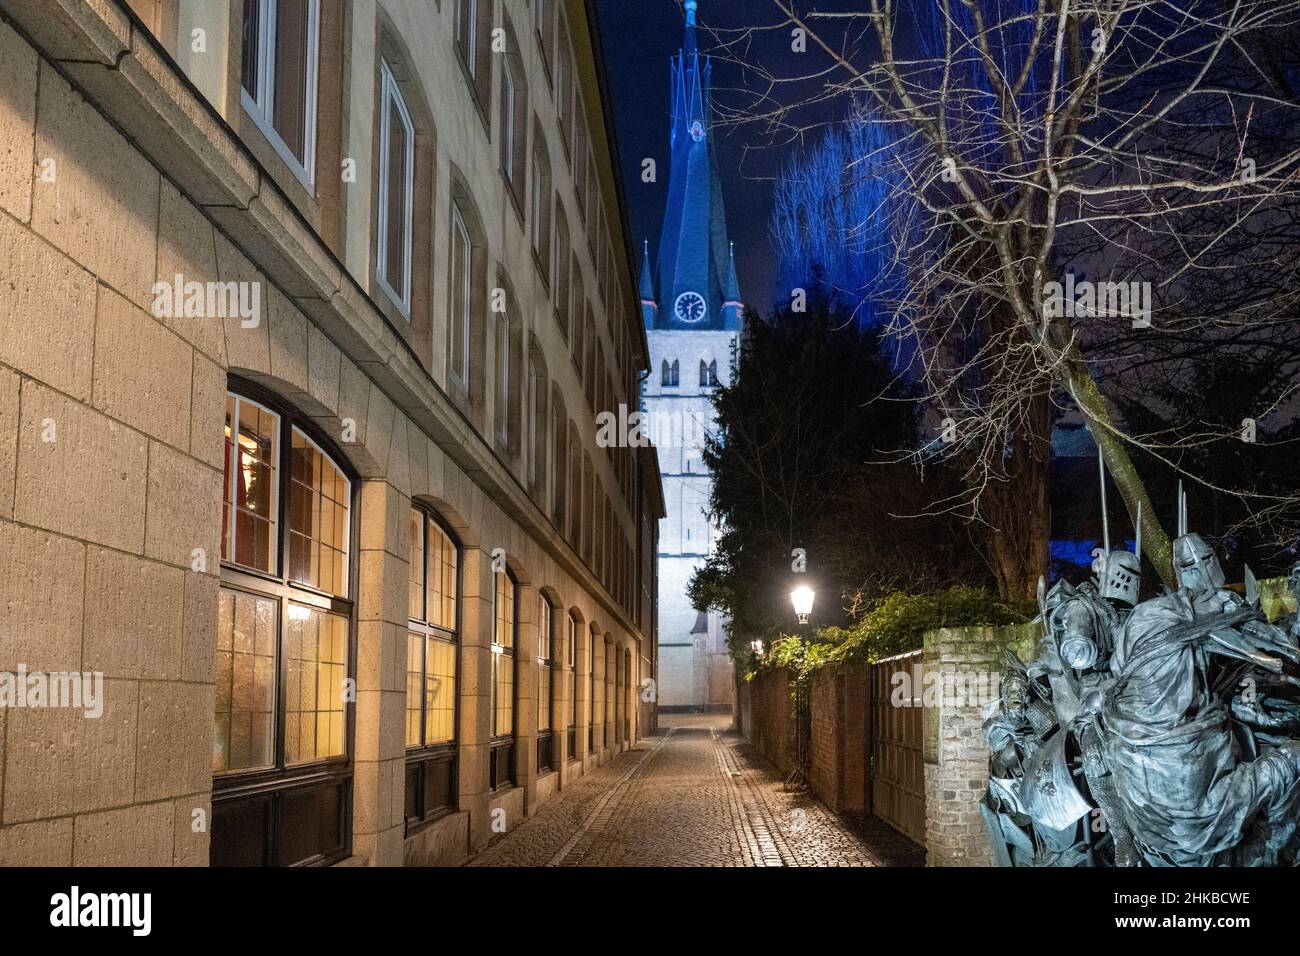 Müller-Schlösser-Gasse, city elevation monument and St.Lambertus church at night in the old town of Düsseldorf, NRW, Germany on 11.12.2021 Stock Photo